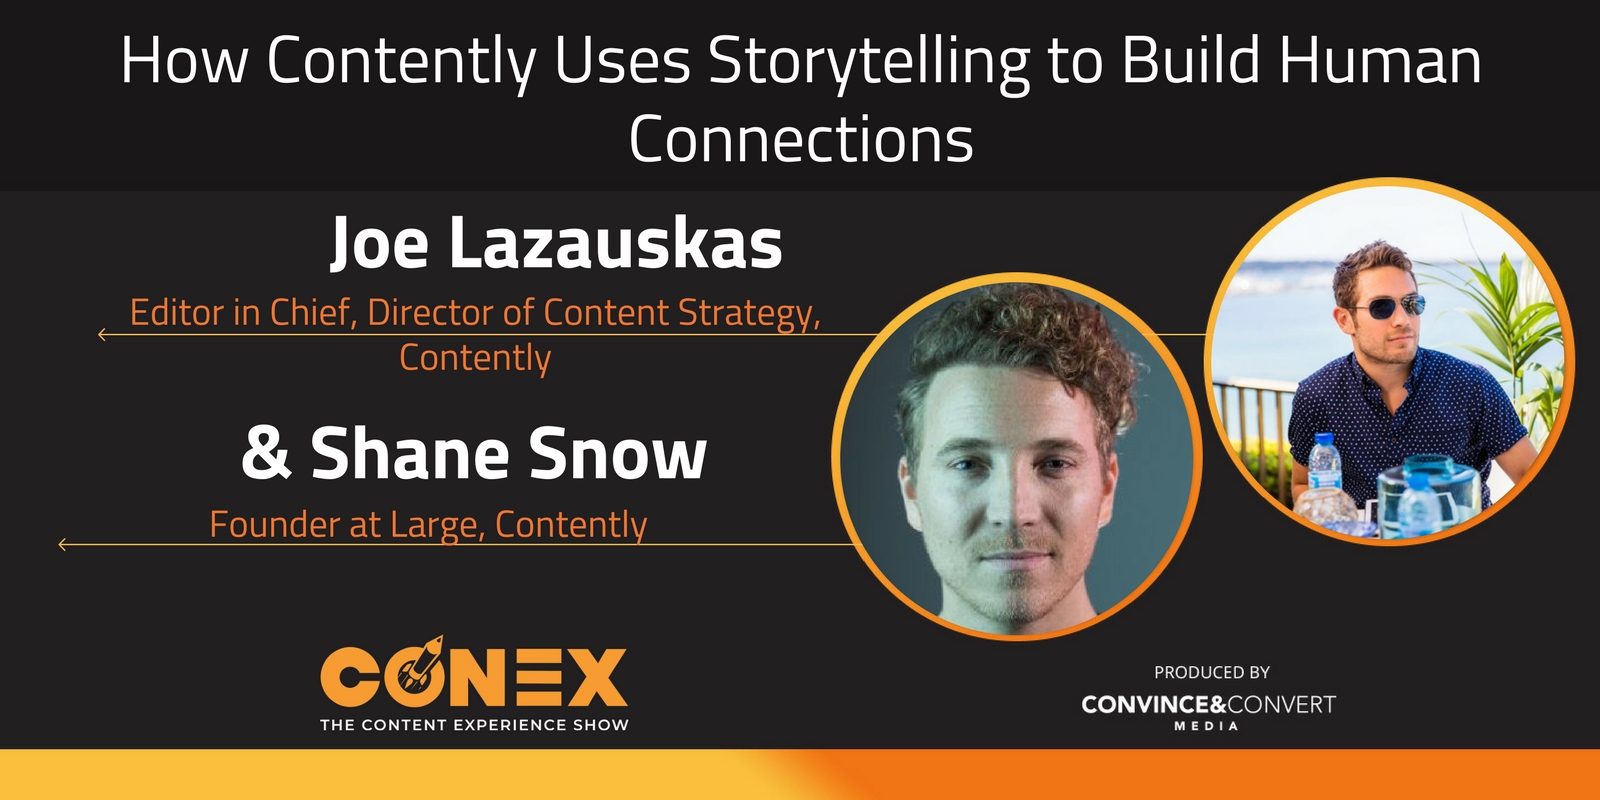 How Contently Uses Storytelling to Build Human Connections